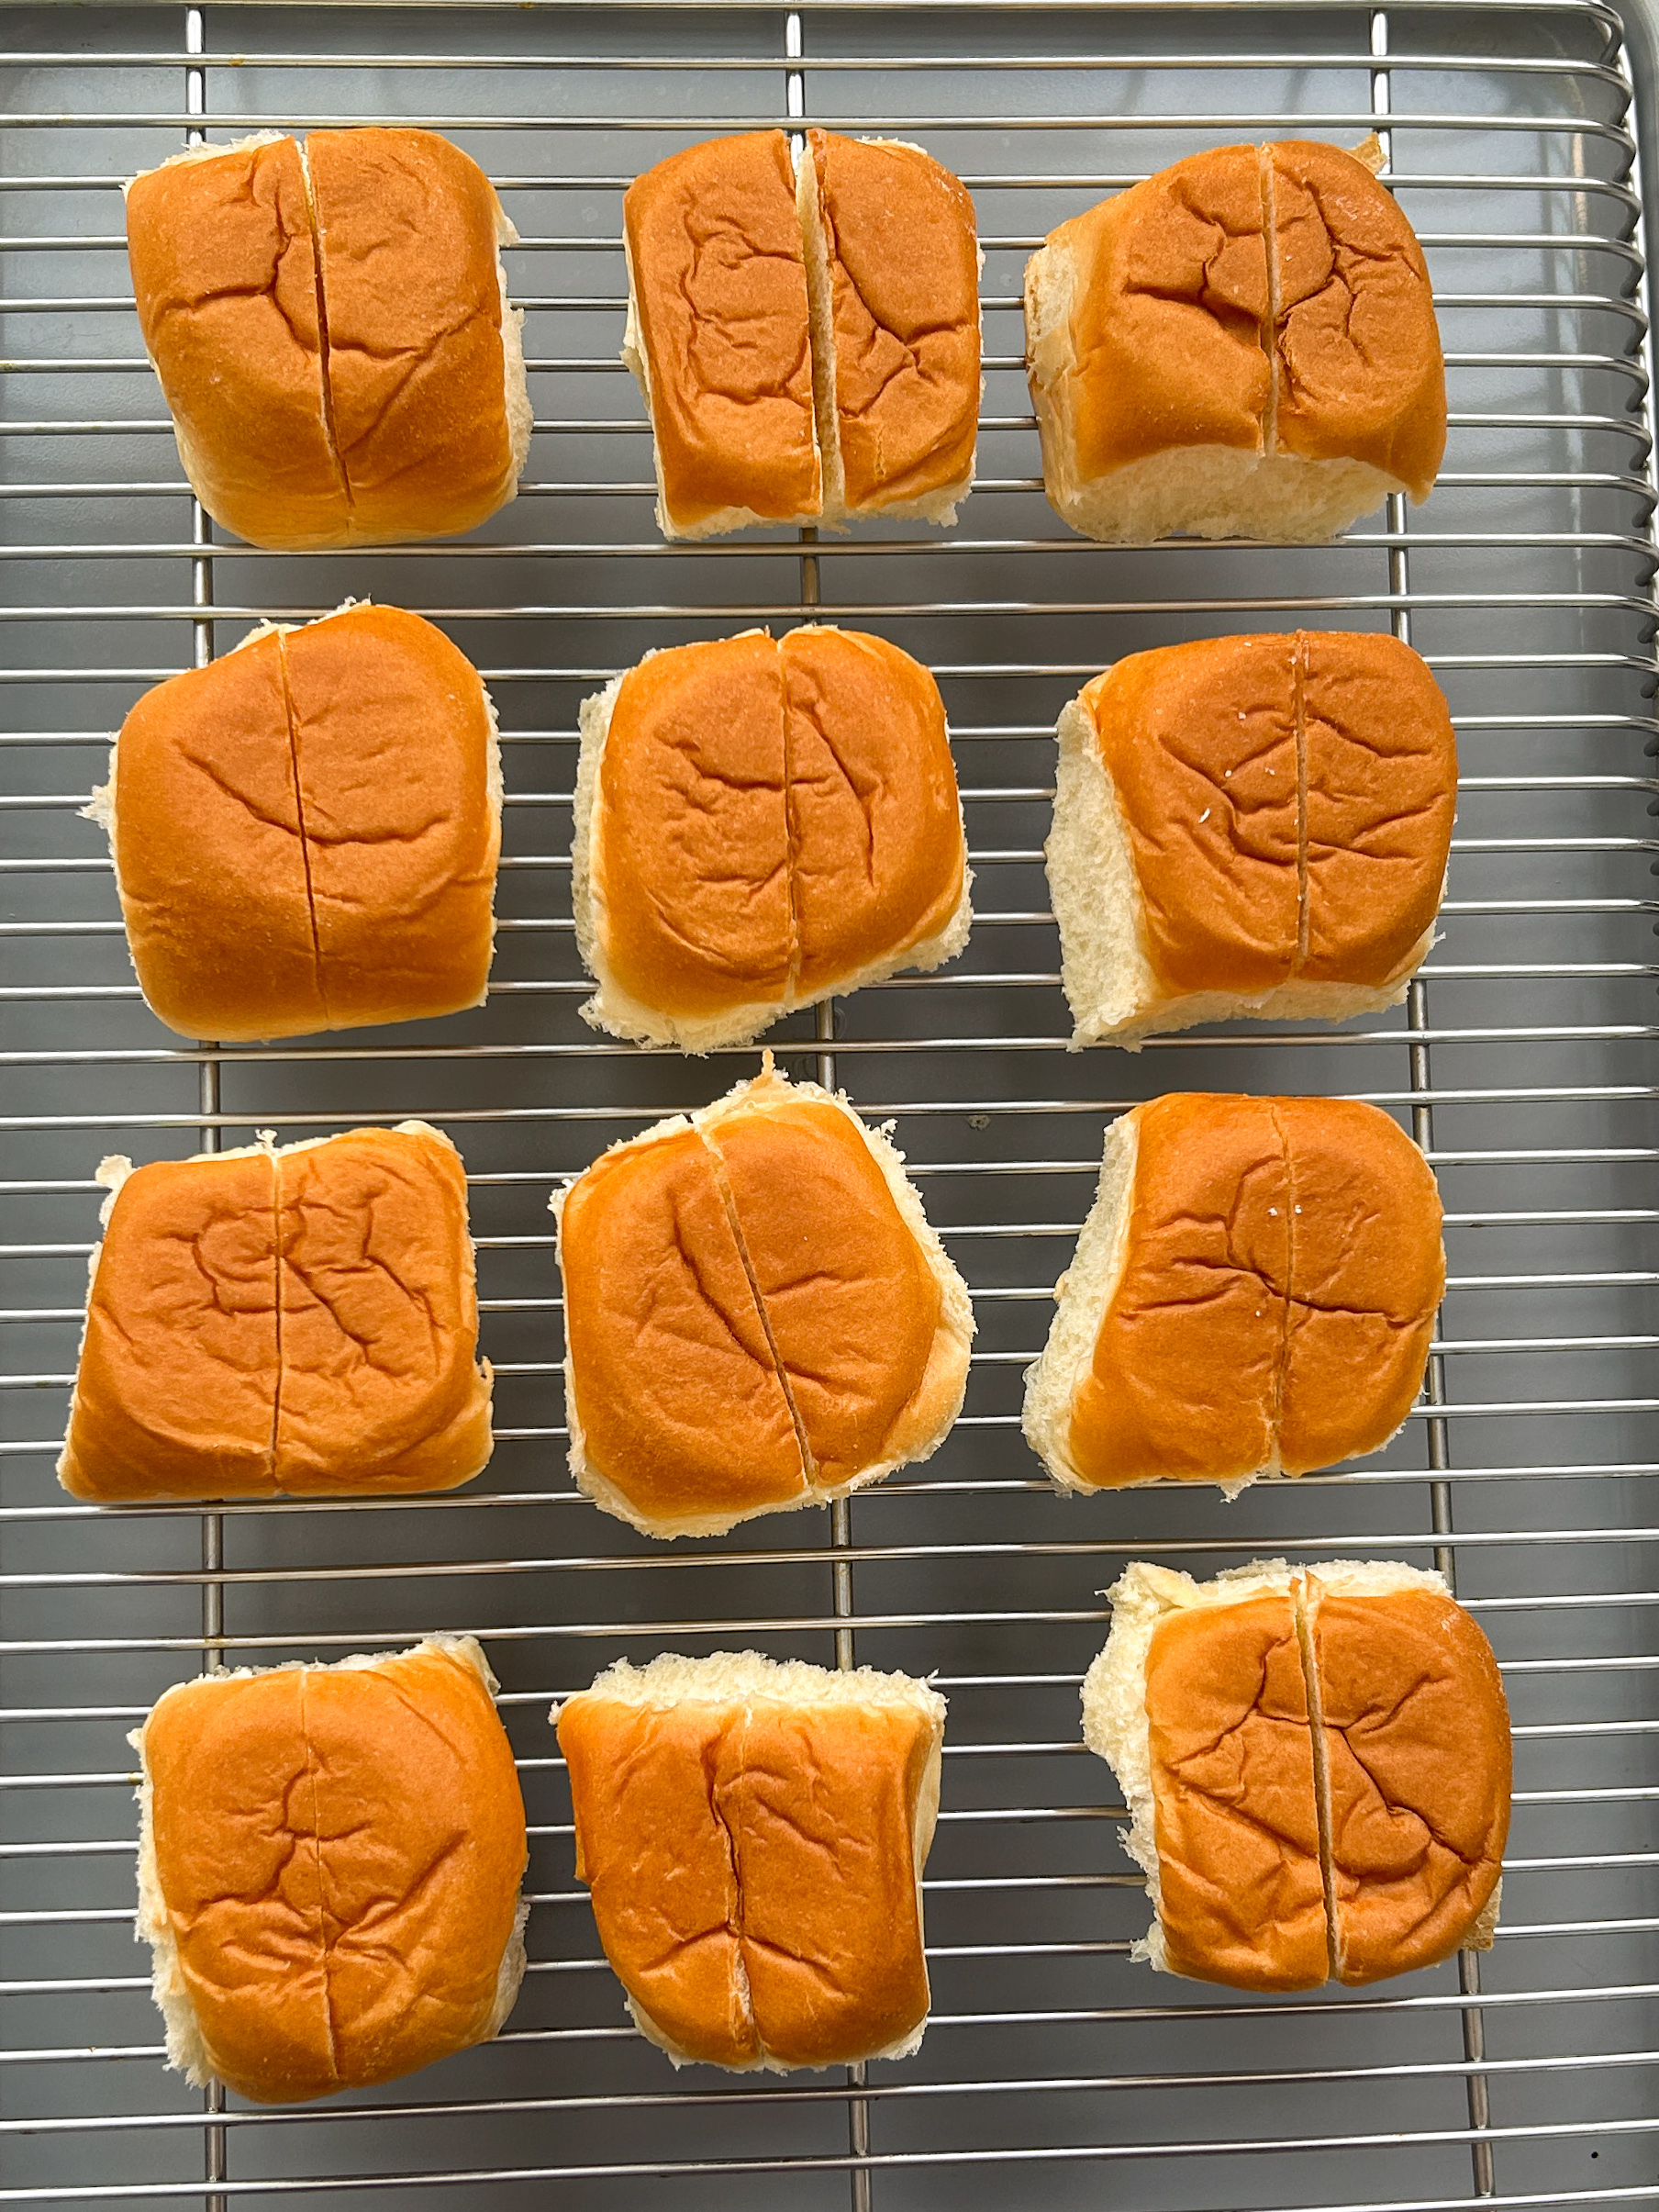 12 buns with a cut down the middle on a wire rack